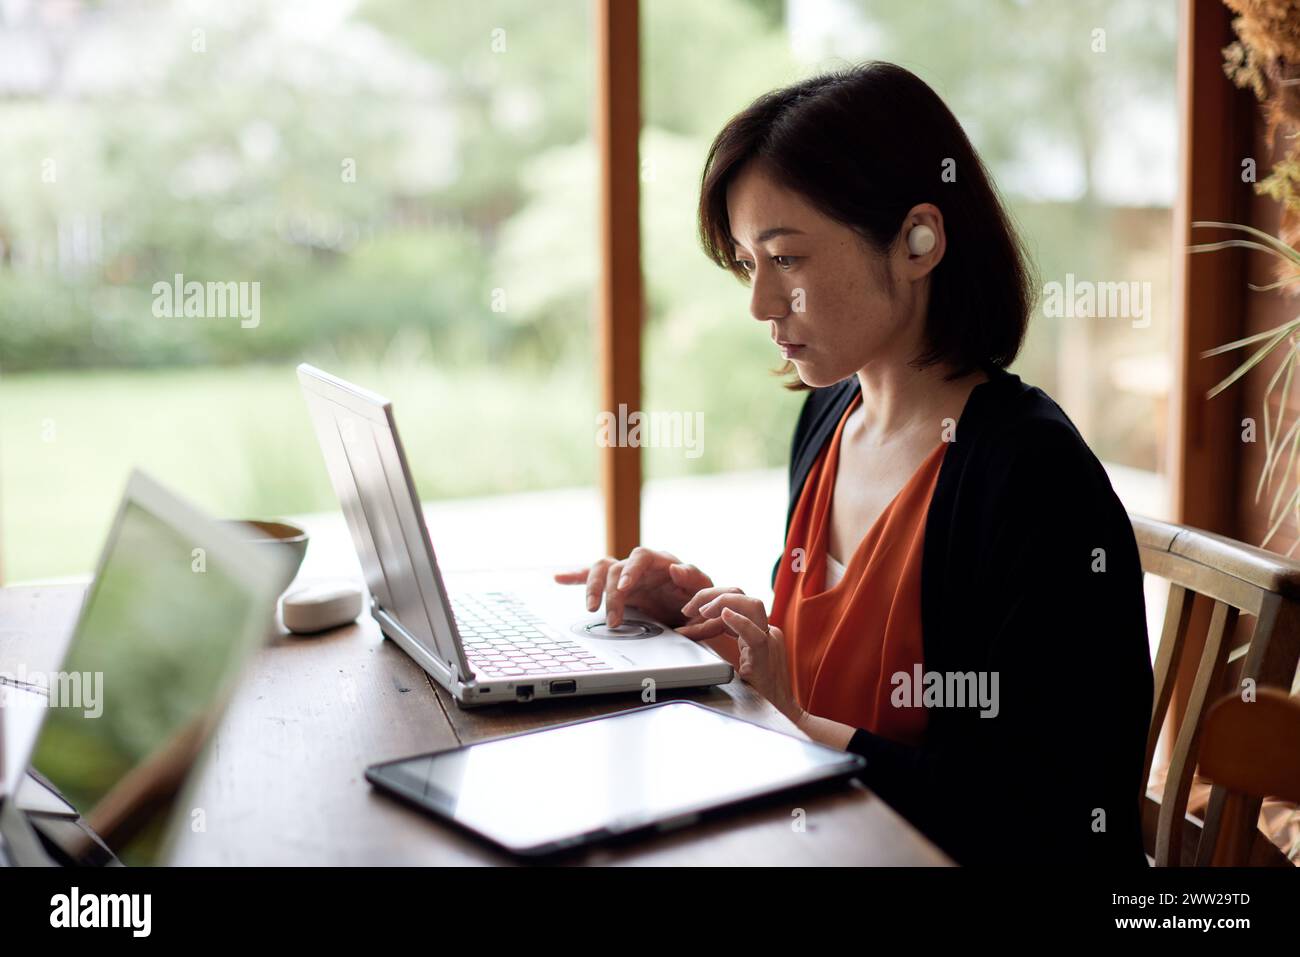 A woman sitting at a table with a laptop Stock Photo